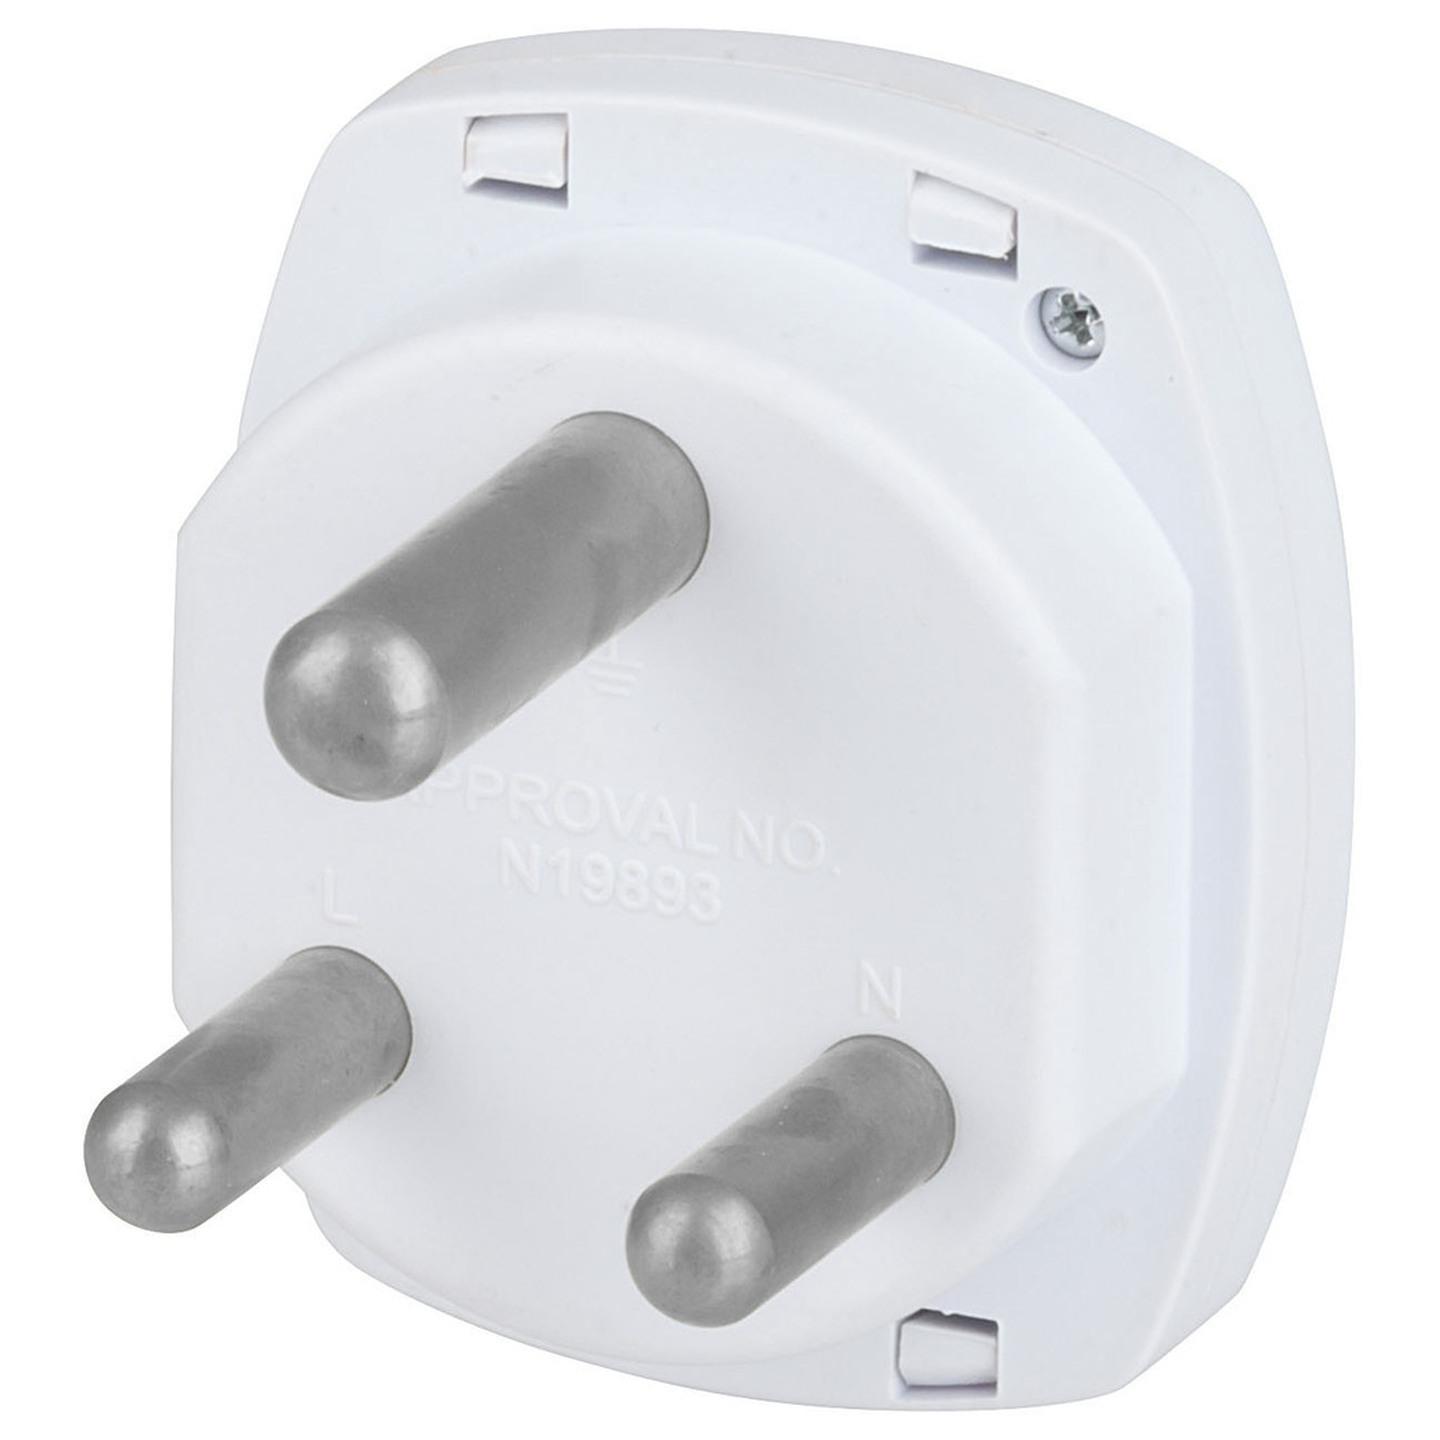 Mains Travel Adaptor for Australia/New Zealand going to South Africa/India